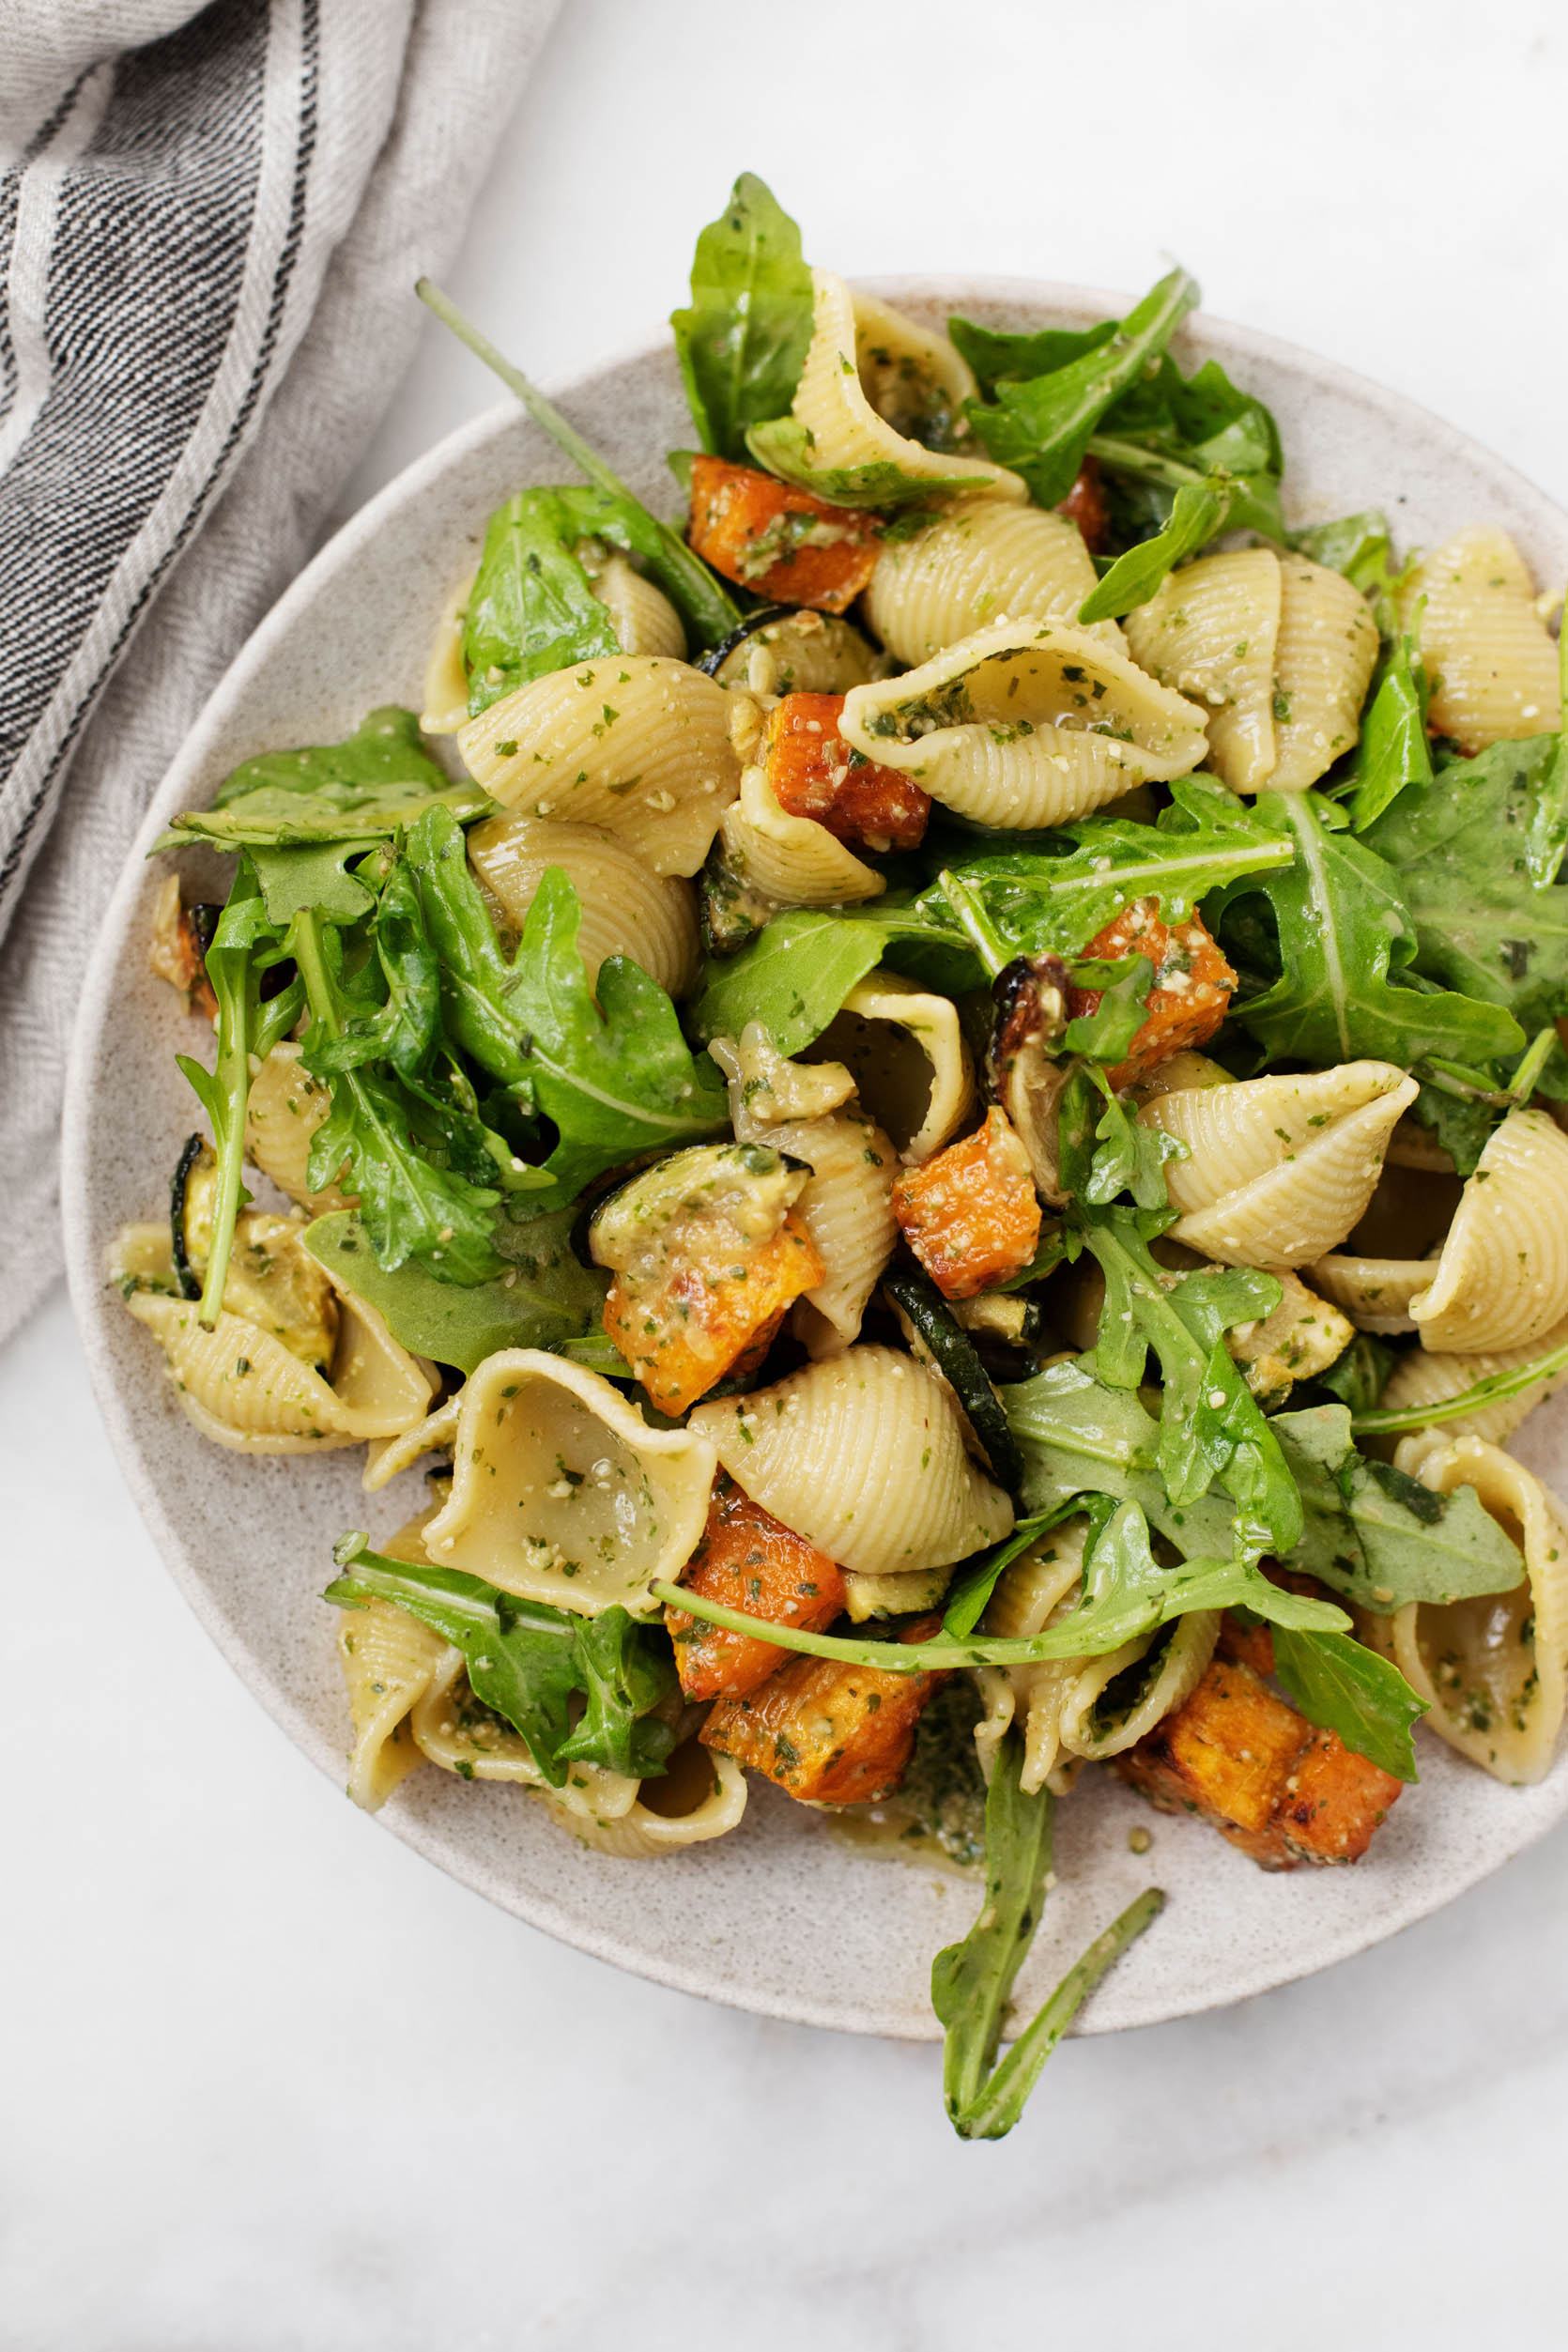 Pasta shells are dressed with freshly made pesto and tossed together with arugula, roasted butternut squash, and zucchini. They rest on a serving plate with a cloth napkin nearby.